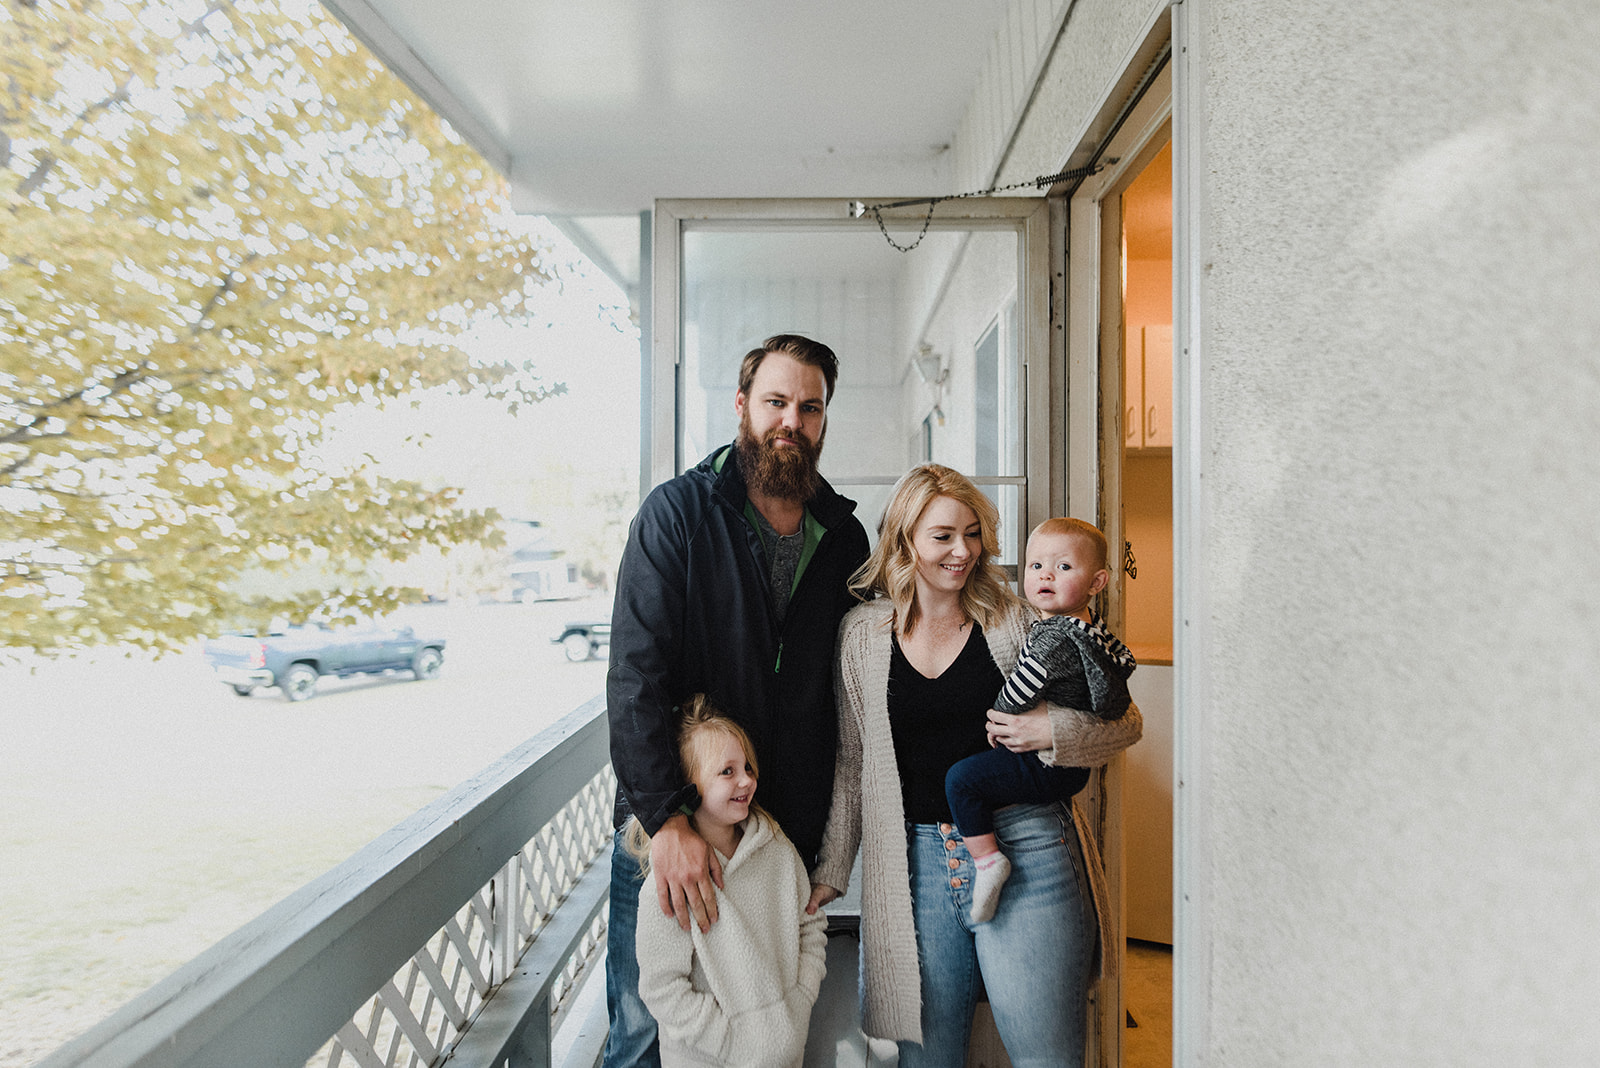 Kamloops Realtor Skyleigh McCallum stands with her family in the doorway of a home they recently purchased, debating the pros and cons of living in your renovation.